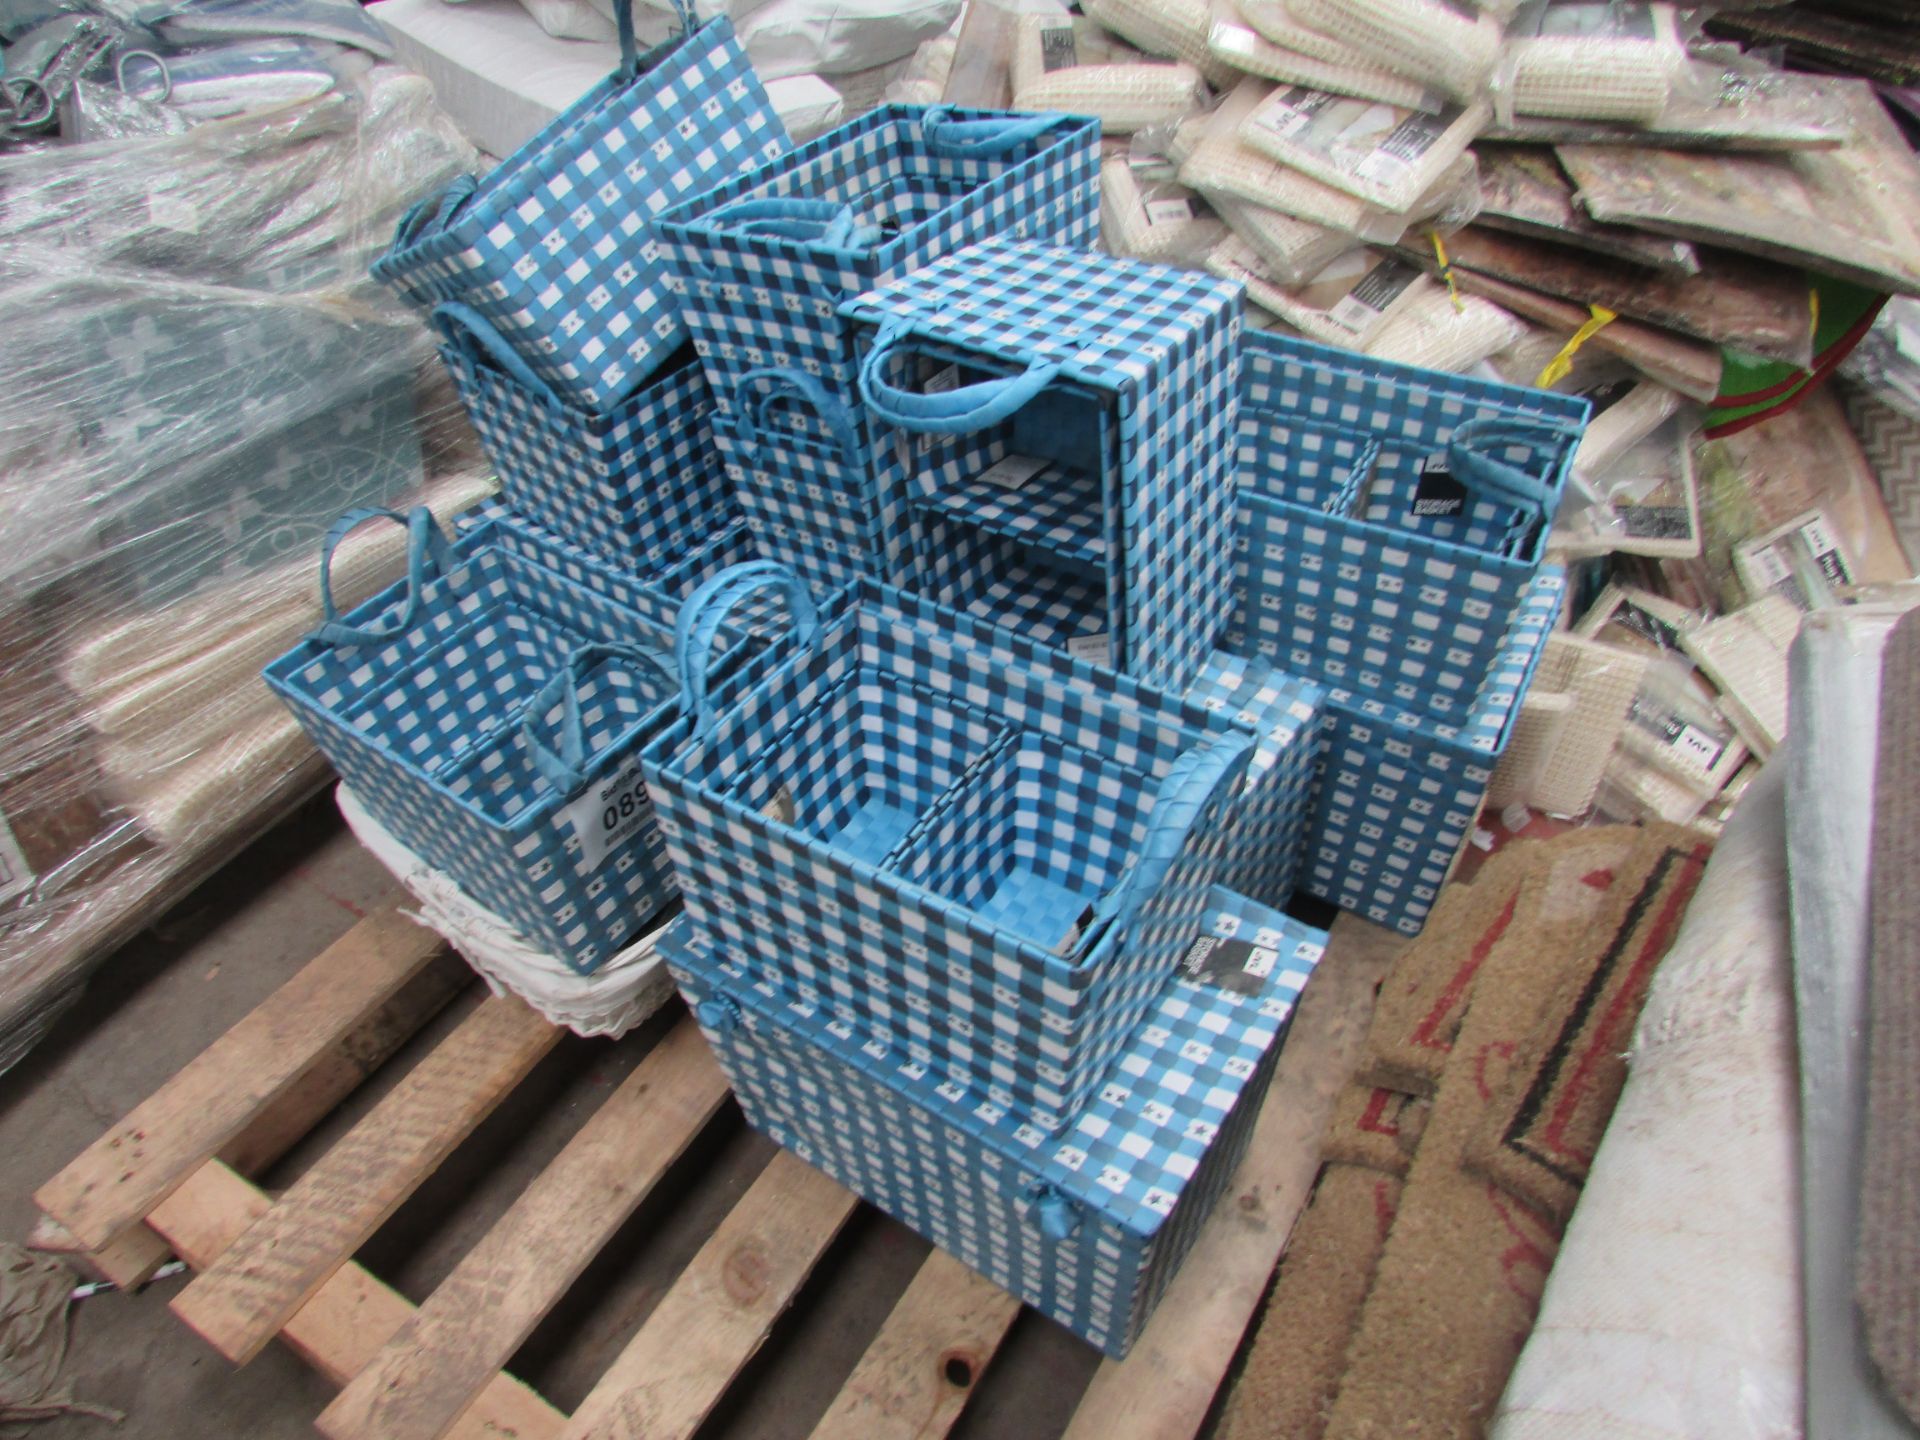 Approx 15 Blue Storage Boxes